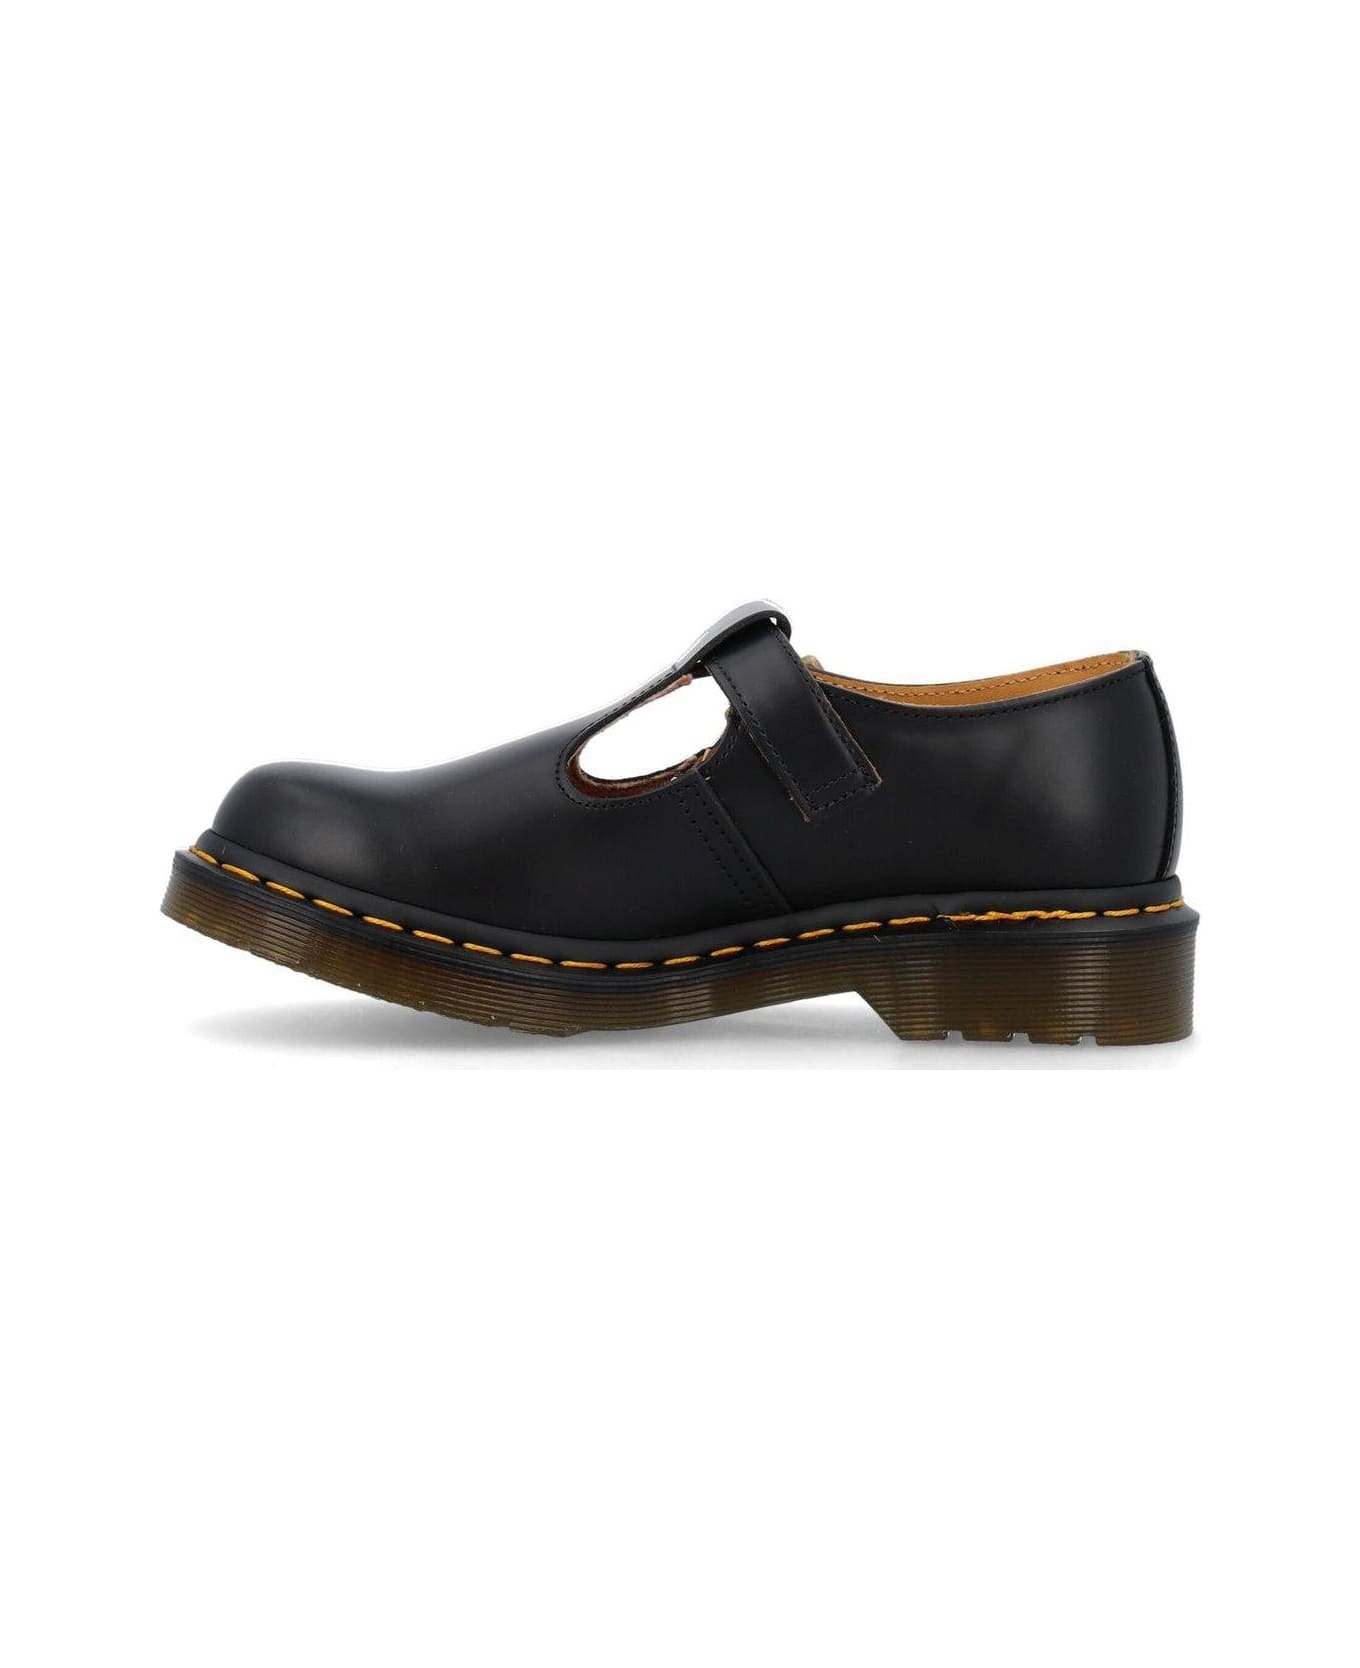 Dr. Martens Polley Mary Jane Flat Shoes - Black Smooth